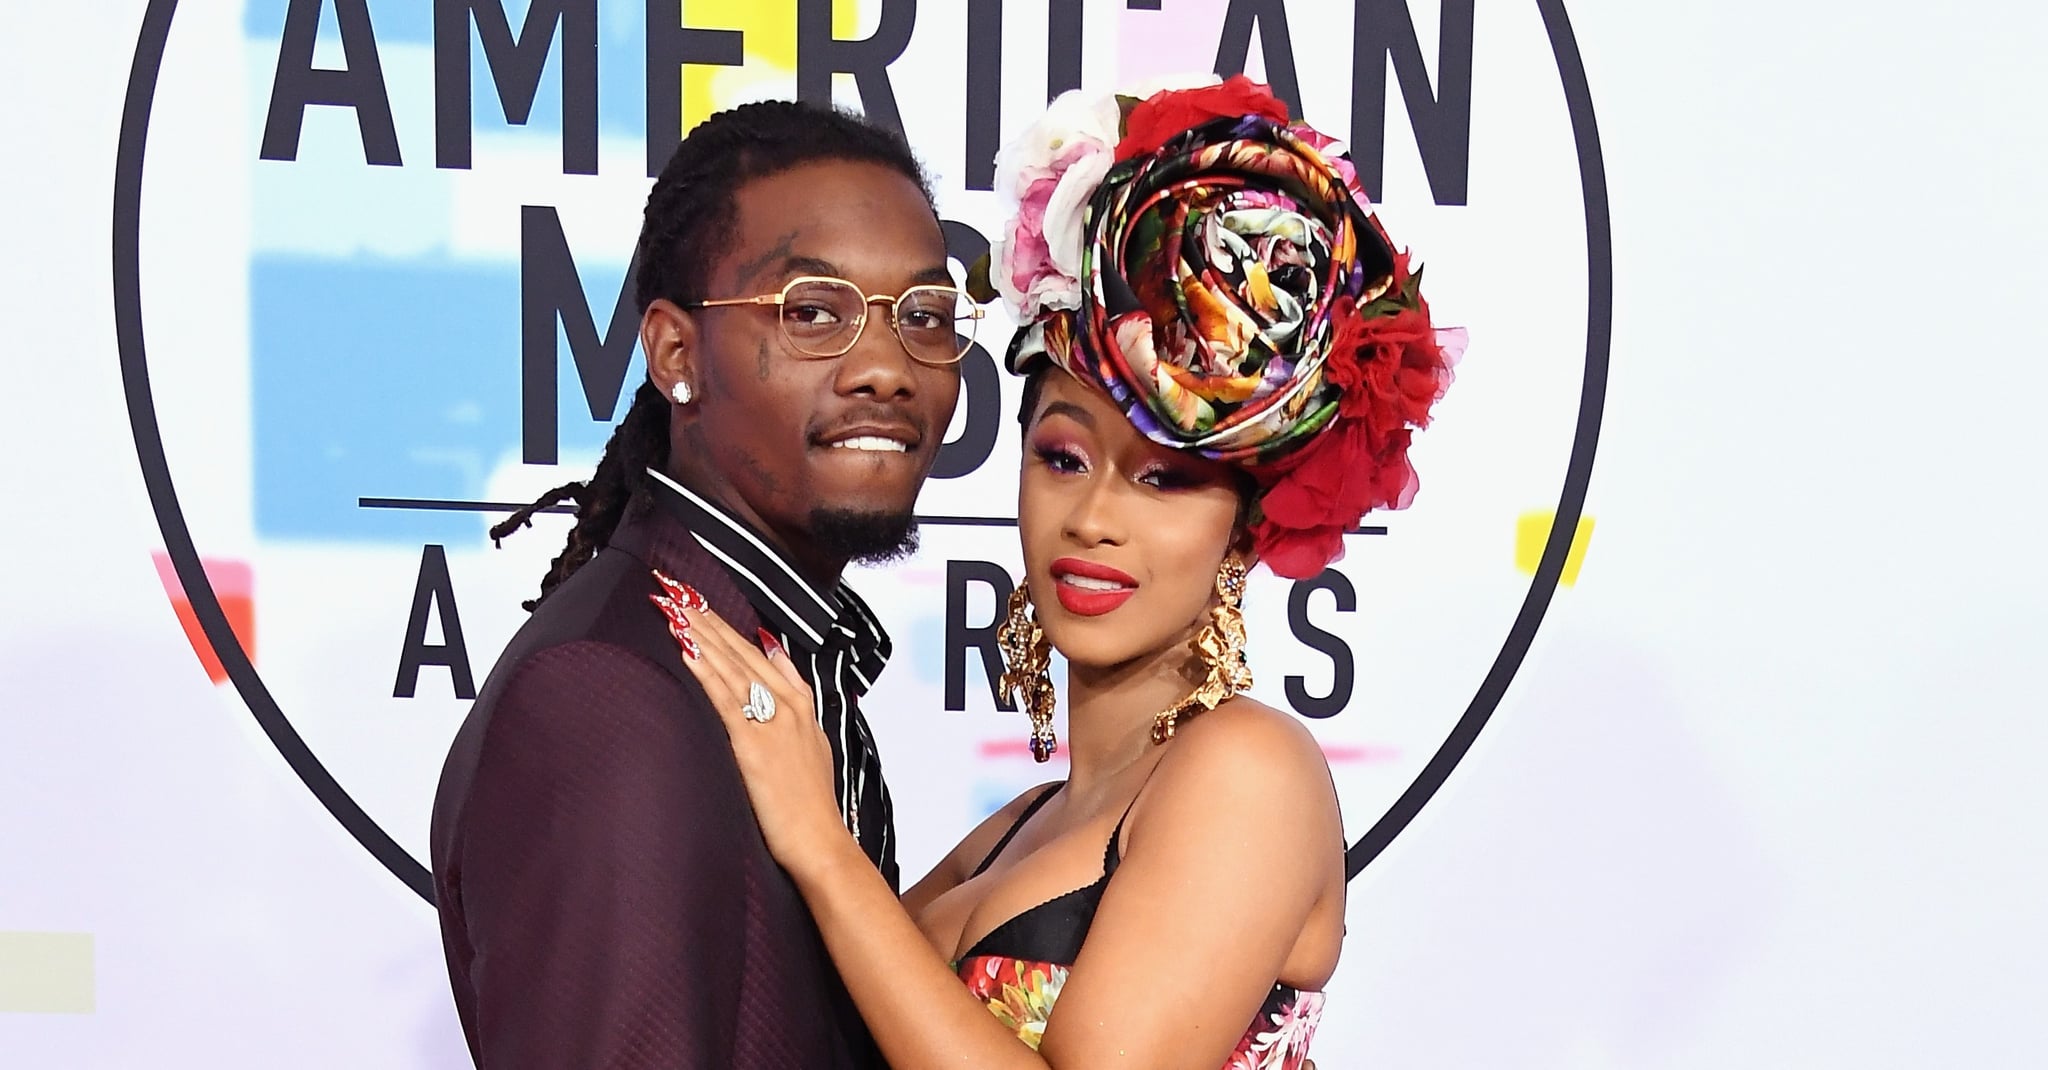 Why Did Cardi B and Offset Break Up? Inside Their Split